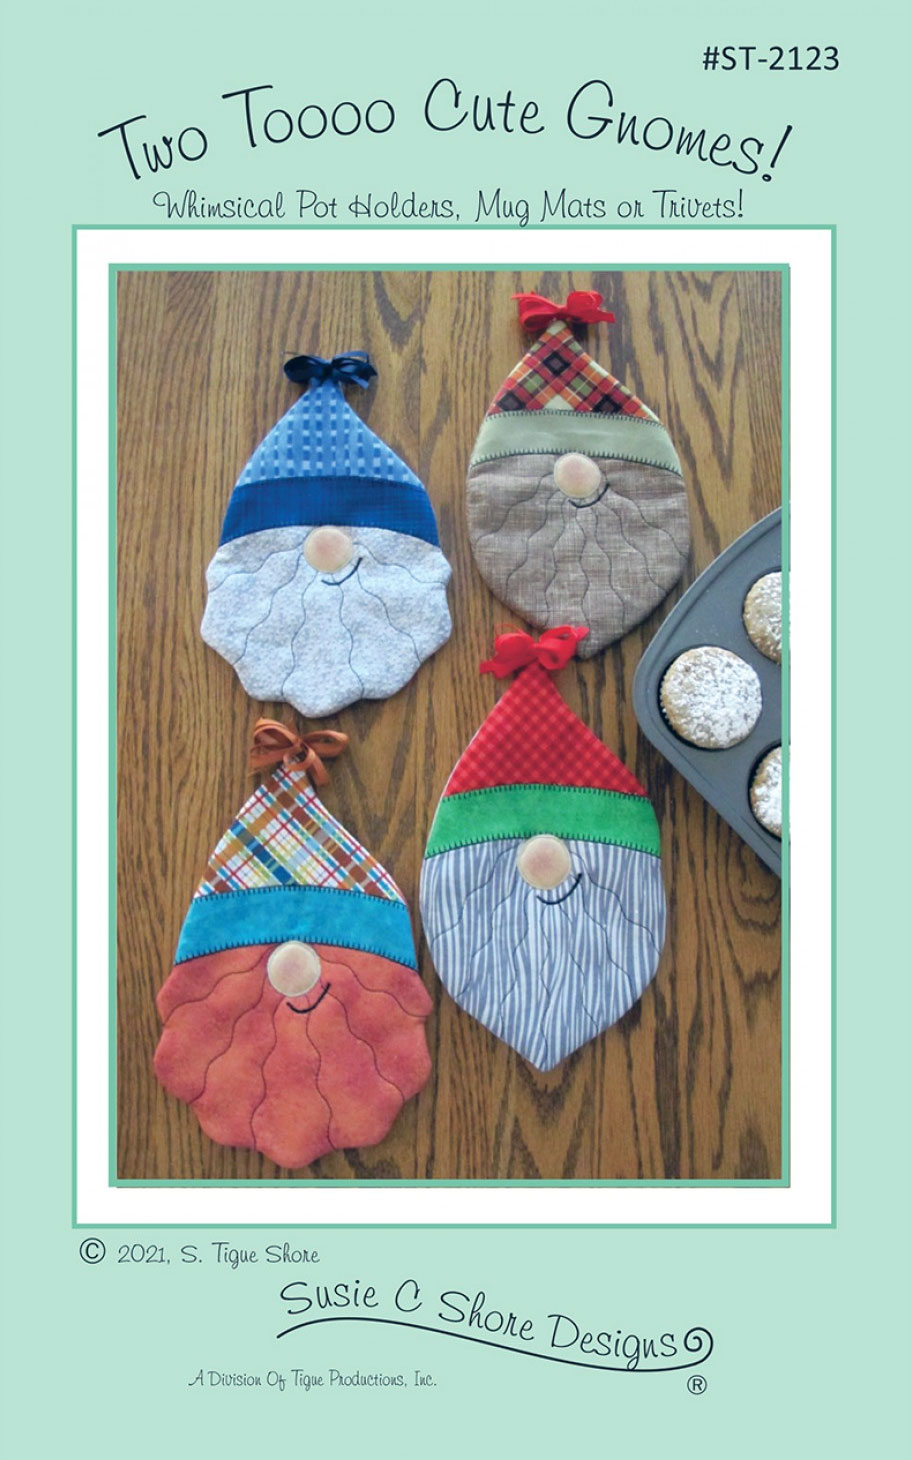 Two-Too-Cute-Gnomes-hot-pads-sewing-pattern-Susie-C-Shore-front